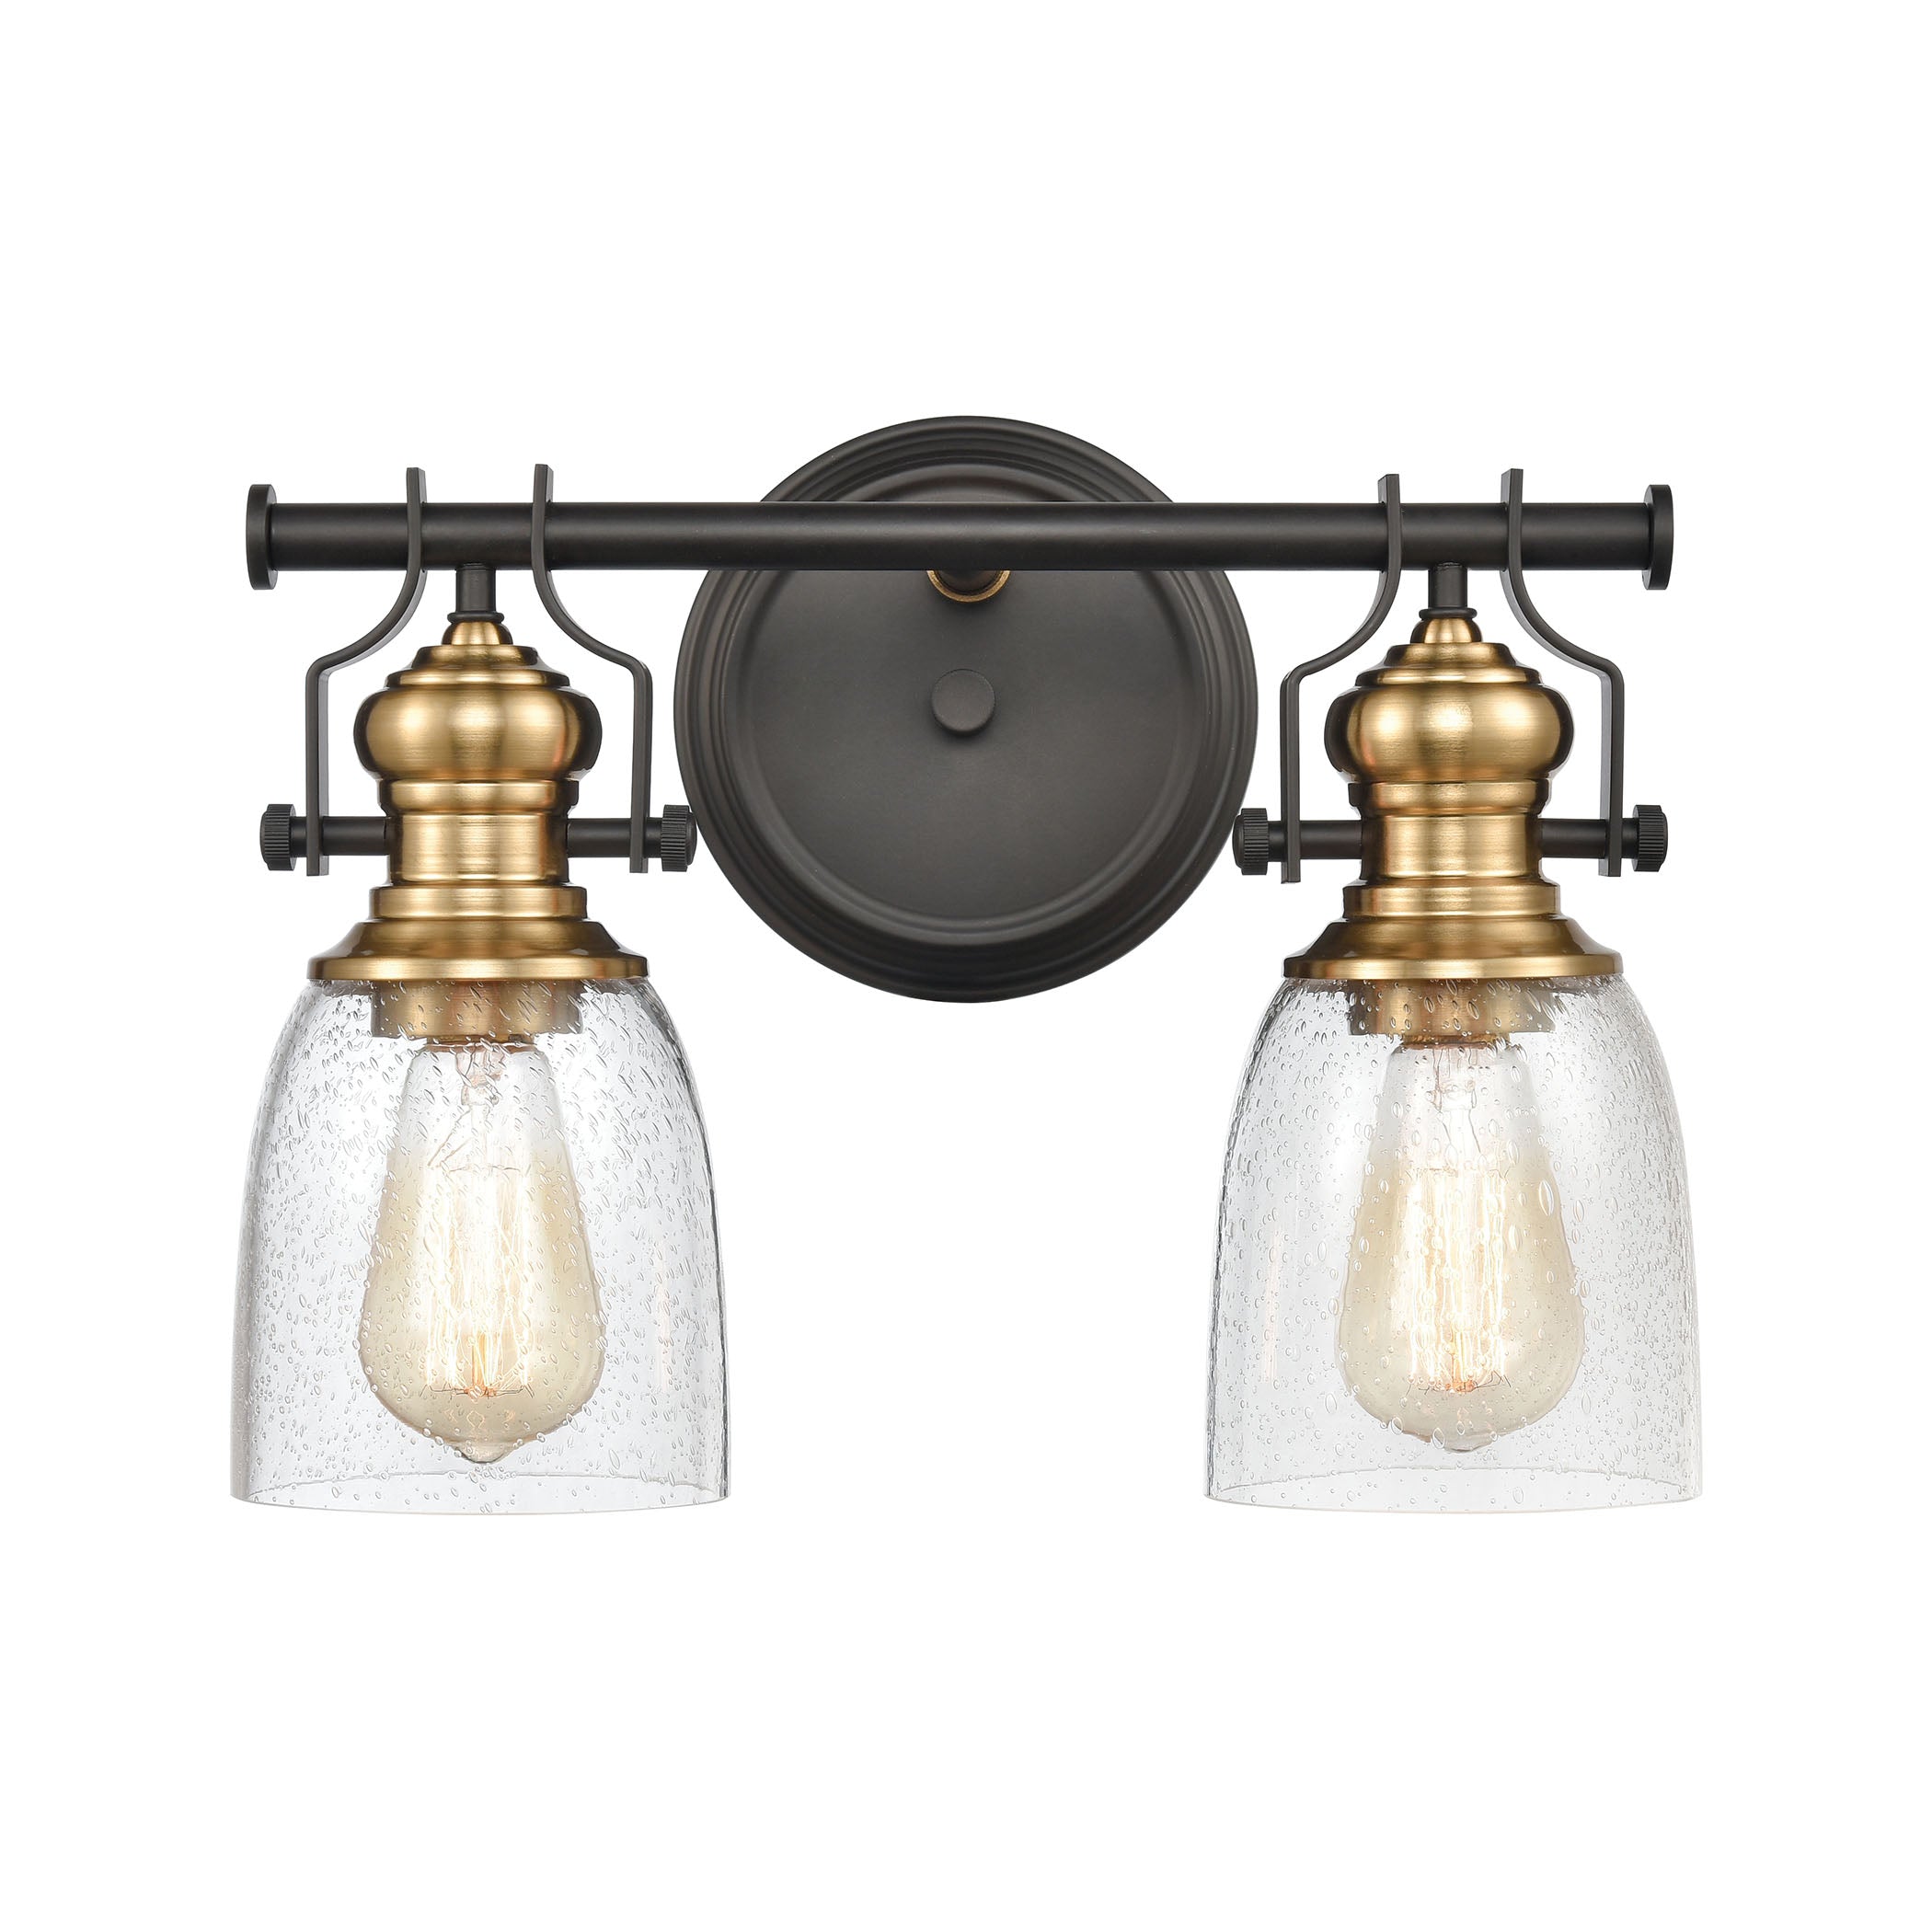 ELK Lighting 66685-2 Chadwick 2-Light Vanity Light in Oil Rubbed Bronze and Satin Brass with Seedy Glass